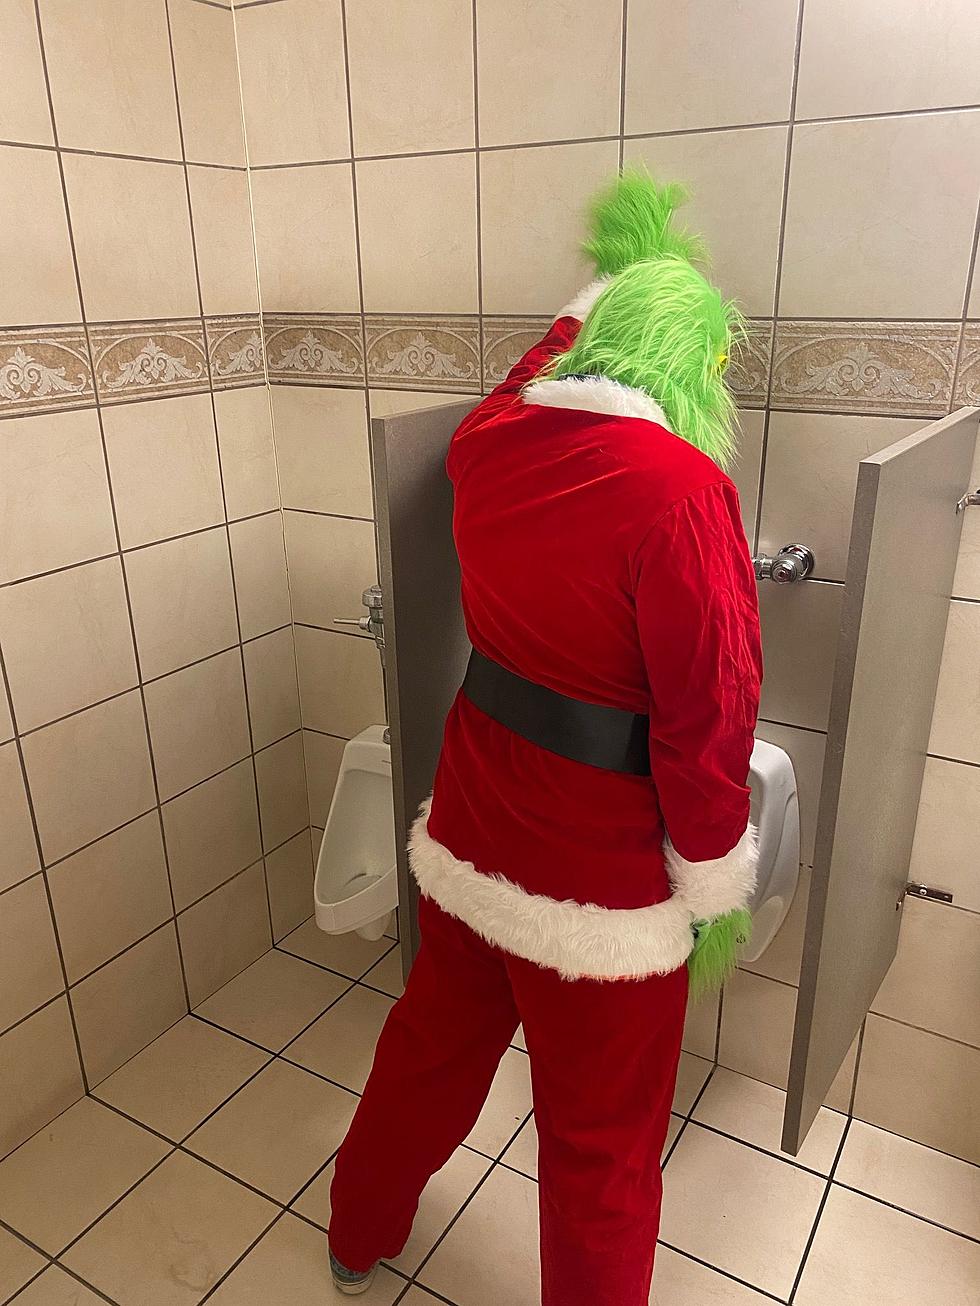 Horrible! The Grinch Should Be Thrown Into Monmouth County Jail